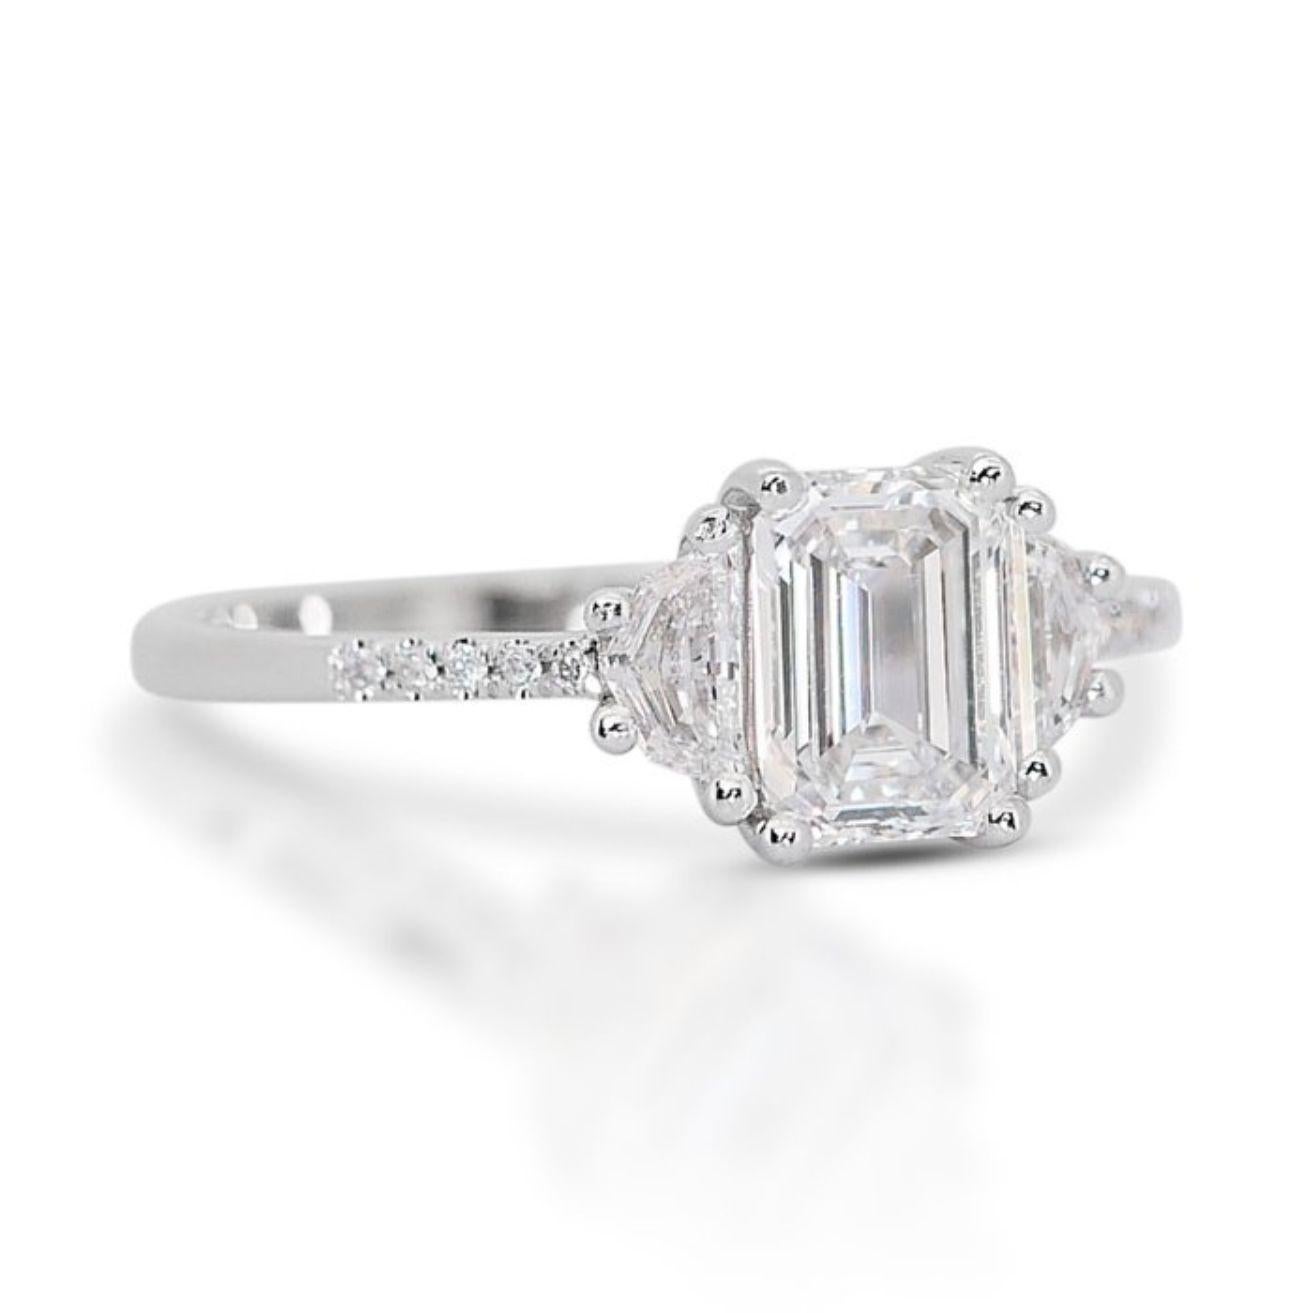 Dazzling Elegance: 1 Carat Emerald Diamond Ring with Exquisite Accents
Embrace unparalleled brilliance with this mesmerizing ring, featuring a captivating 1 carat emerald cut diamond as its stunning centerpiece. Graced with an exceptional D color,